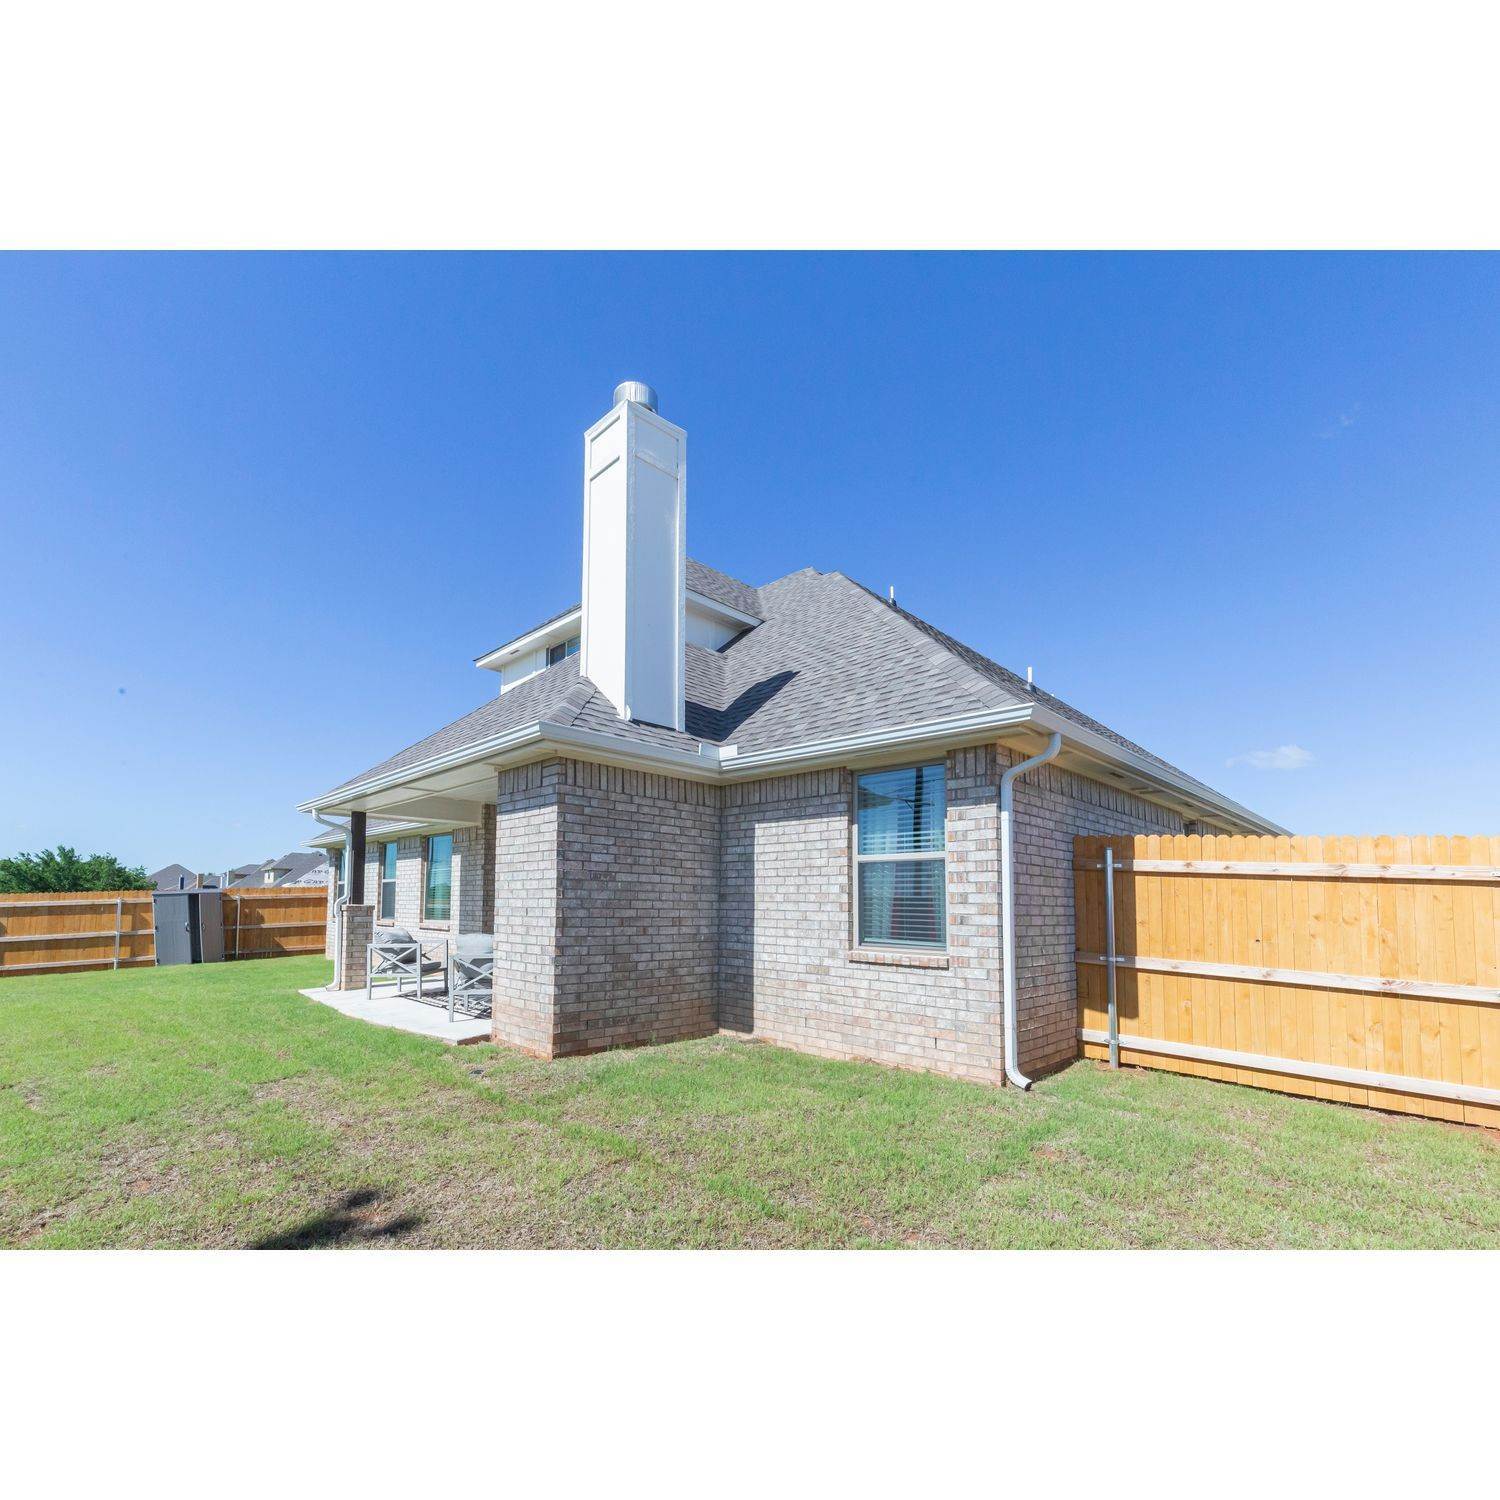 38. Broadmoore Heights building at 2800 Heather Haven, Moore, OK 73160